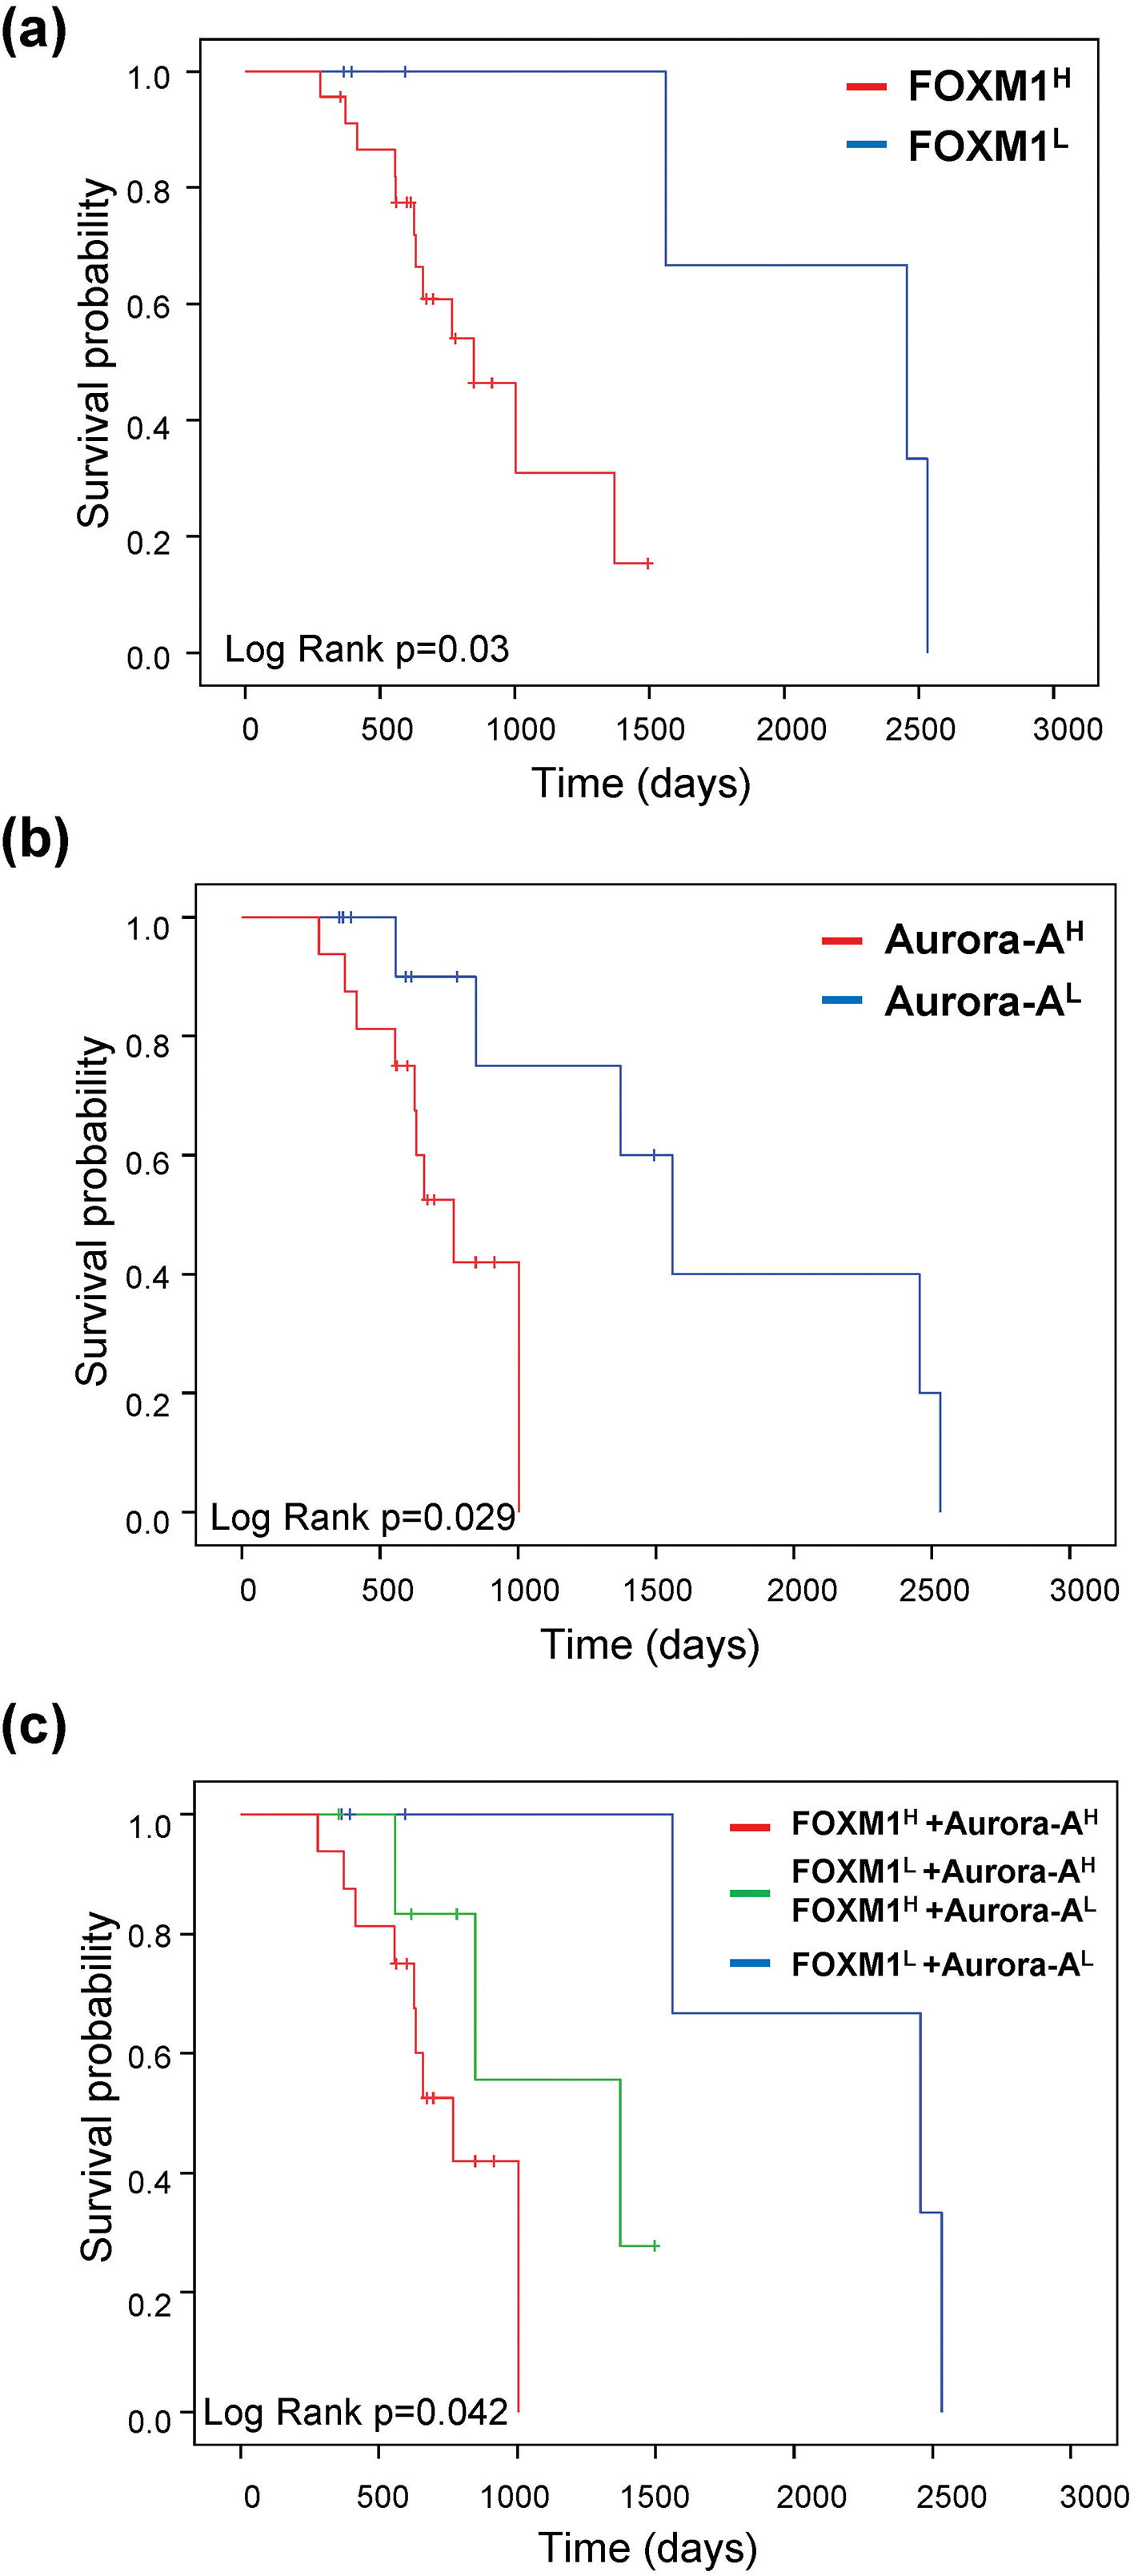 FOXM1 and Aurora-A expression predict the prognosis of sorafenib-treated patients in HCC. KaplanMeier curves of overall survival probability were estimated with different FOXM1 (a), Aurora-A (b), and FOXM1/Aurora-A (c) expression status in sorafenib-treated patients obtained from the TCGA dataset (n= 29).